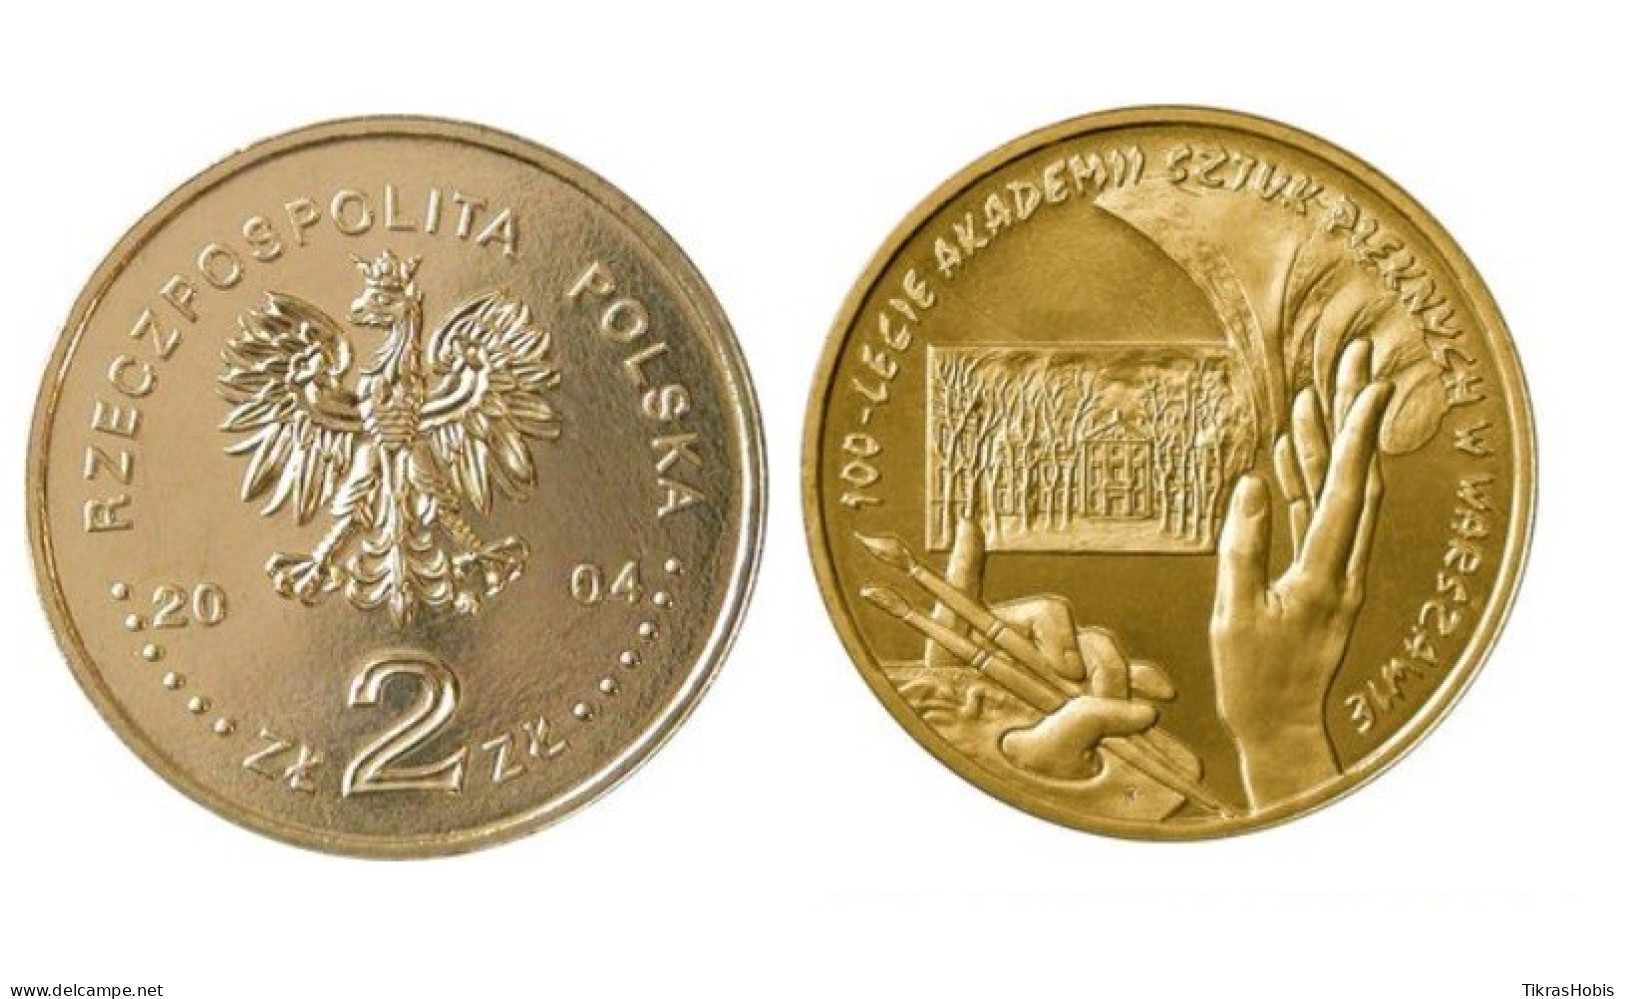 Poland 2 Zlotys, 2004 100 For The Academy Of Fine Arts Y509 - Poland